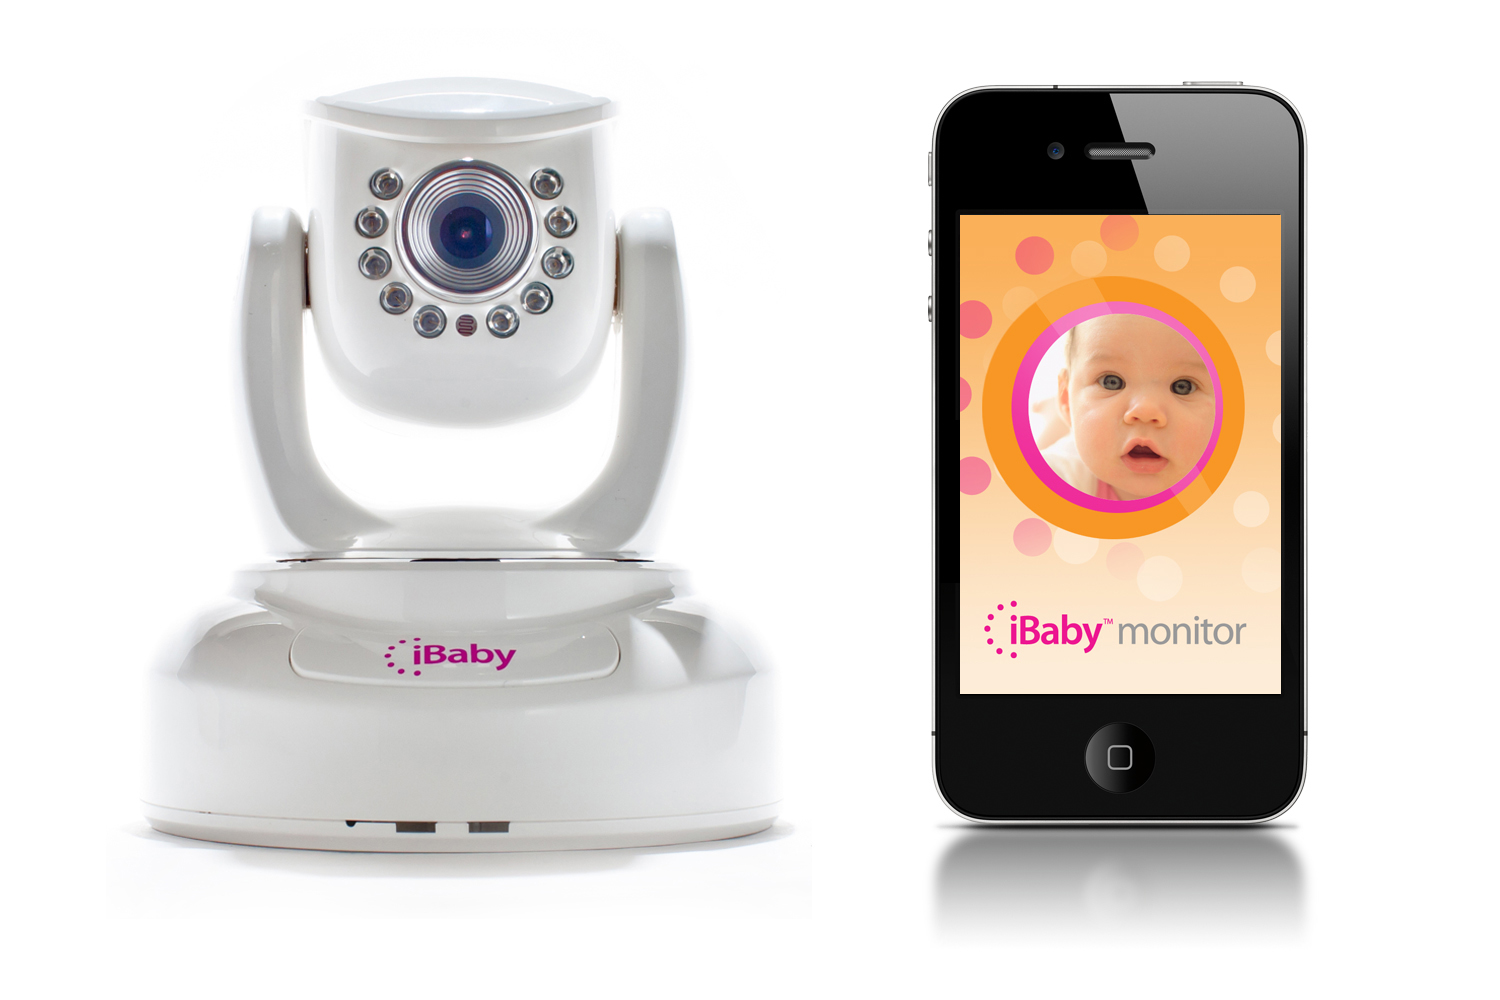 iBaby monitor form iBabyLabs. Anytime and anywhere